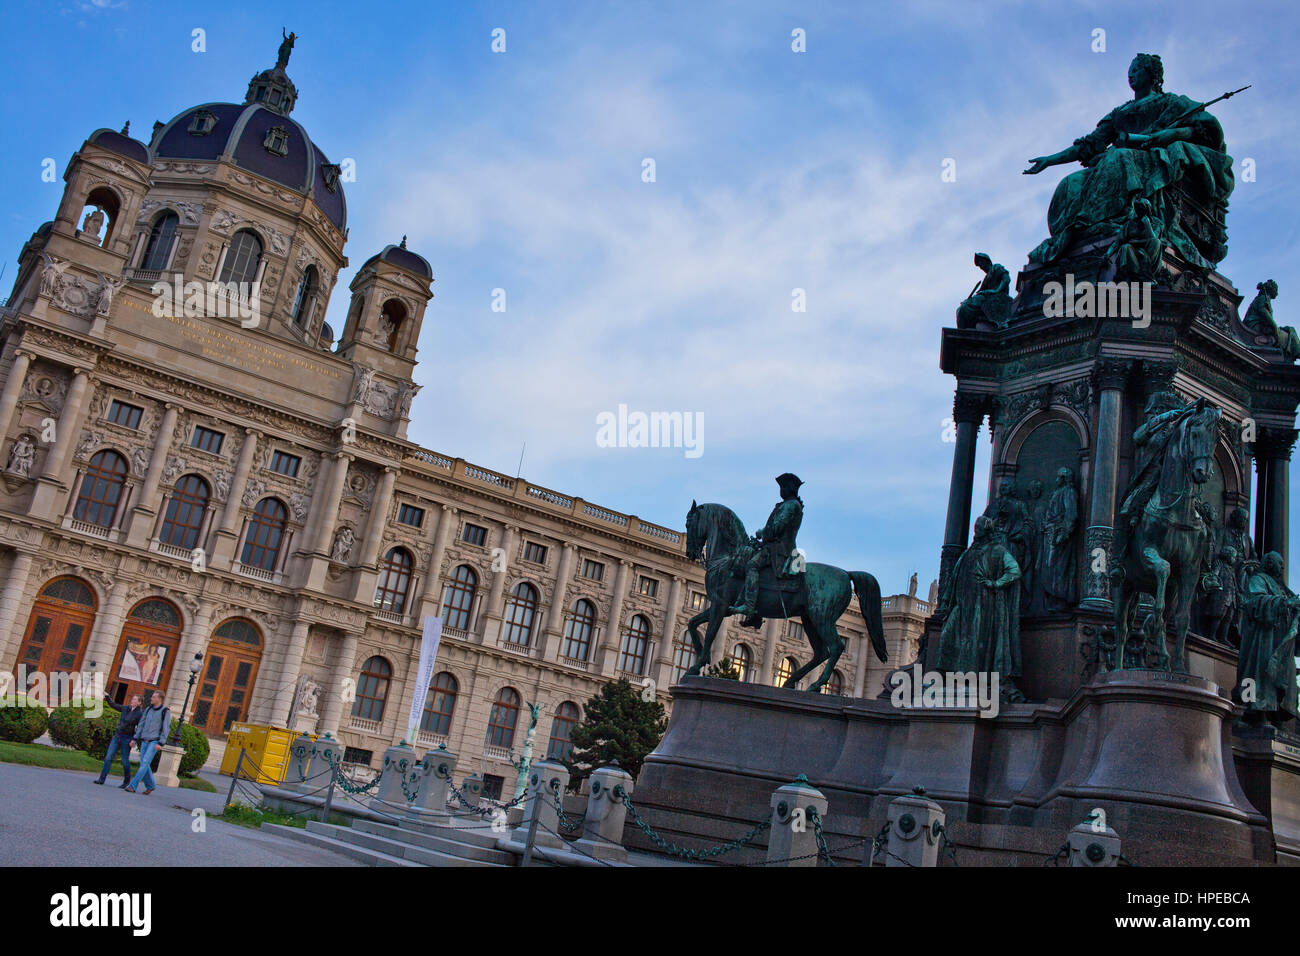 Maria Theresien monument at Maria Theresien platz in front of Kunsthistorisches Museum (Museum of Art History),Vienna, Austria, Europe Stock Photo